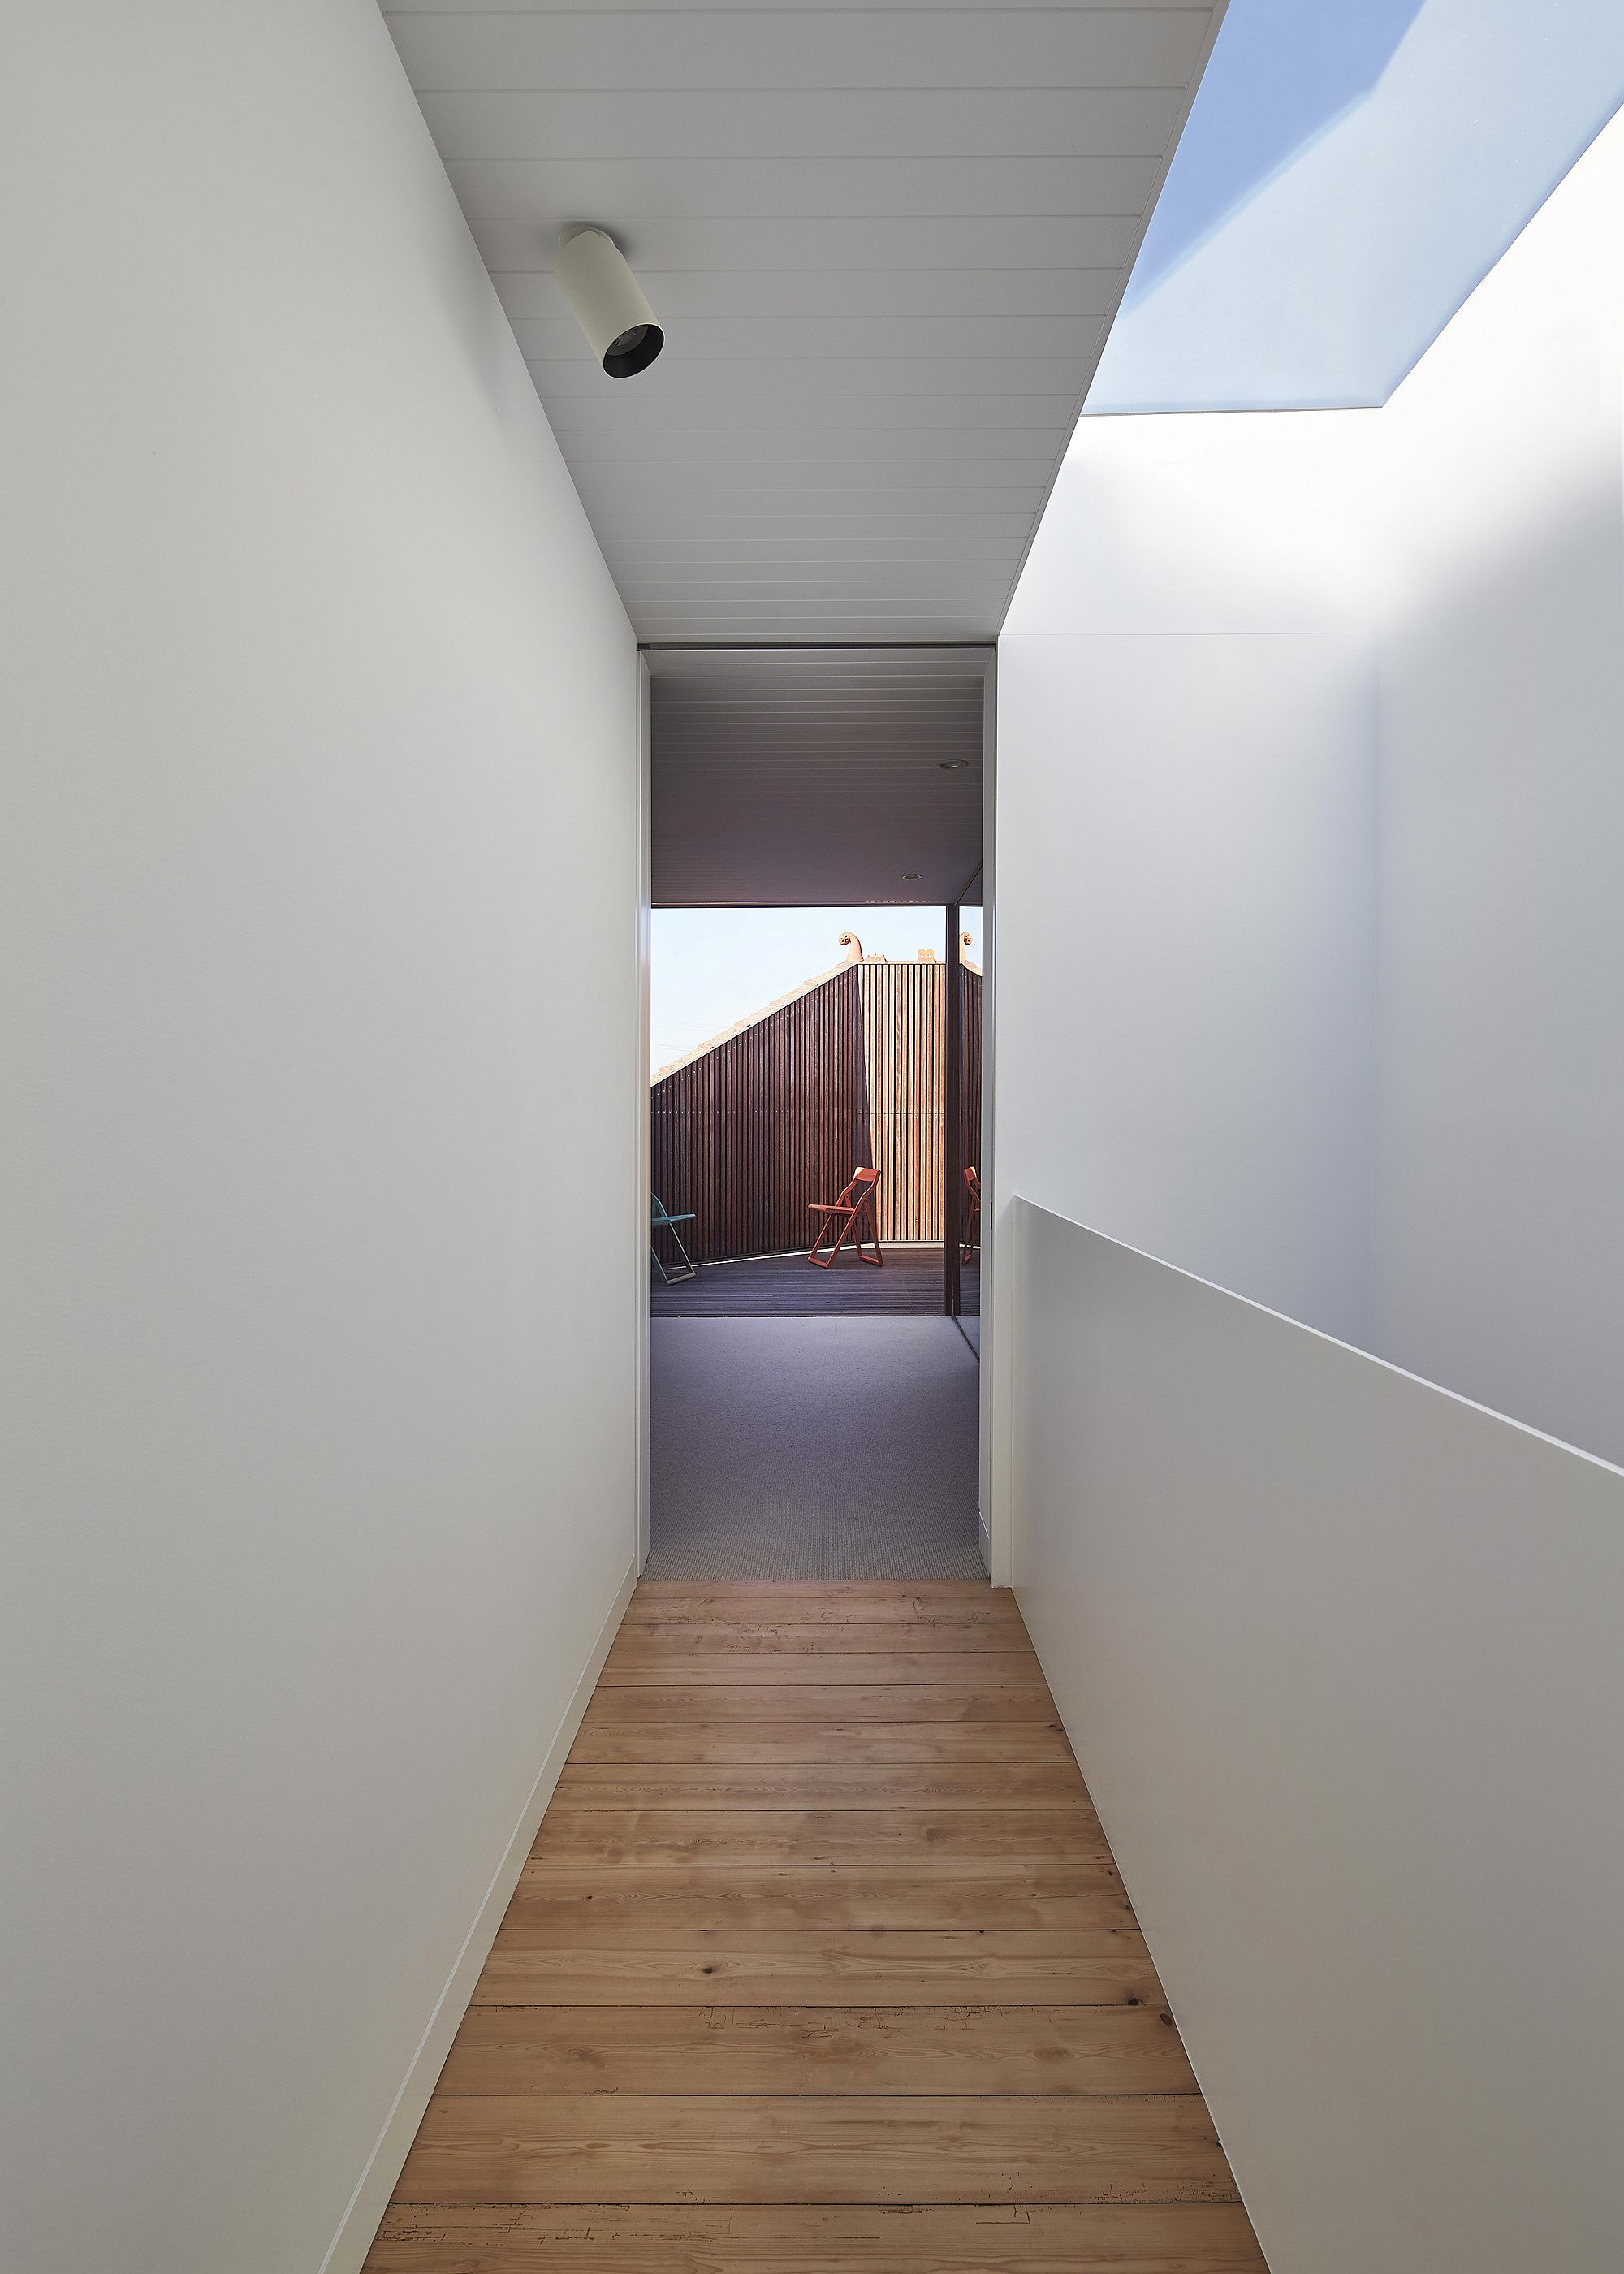 Skylight-brings-ventilation-to-various-levels-of-the-new-addition